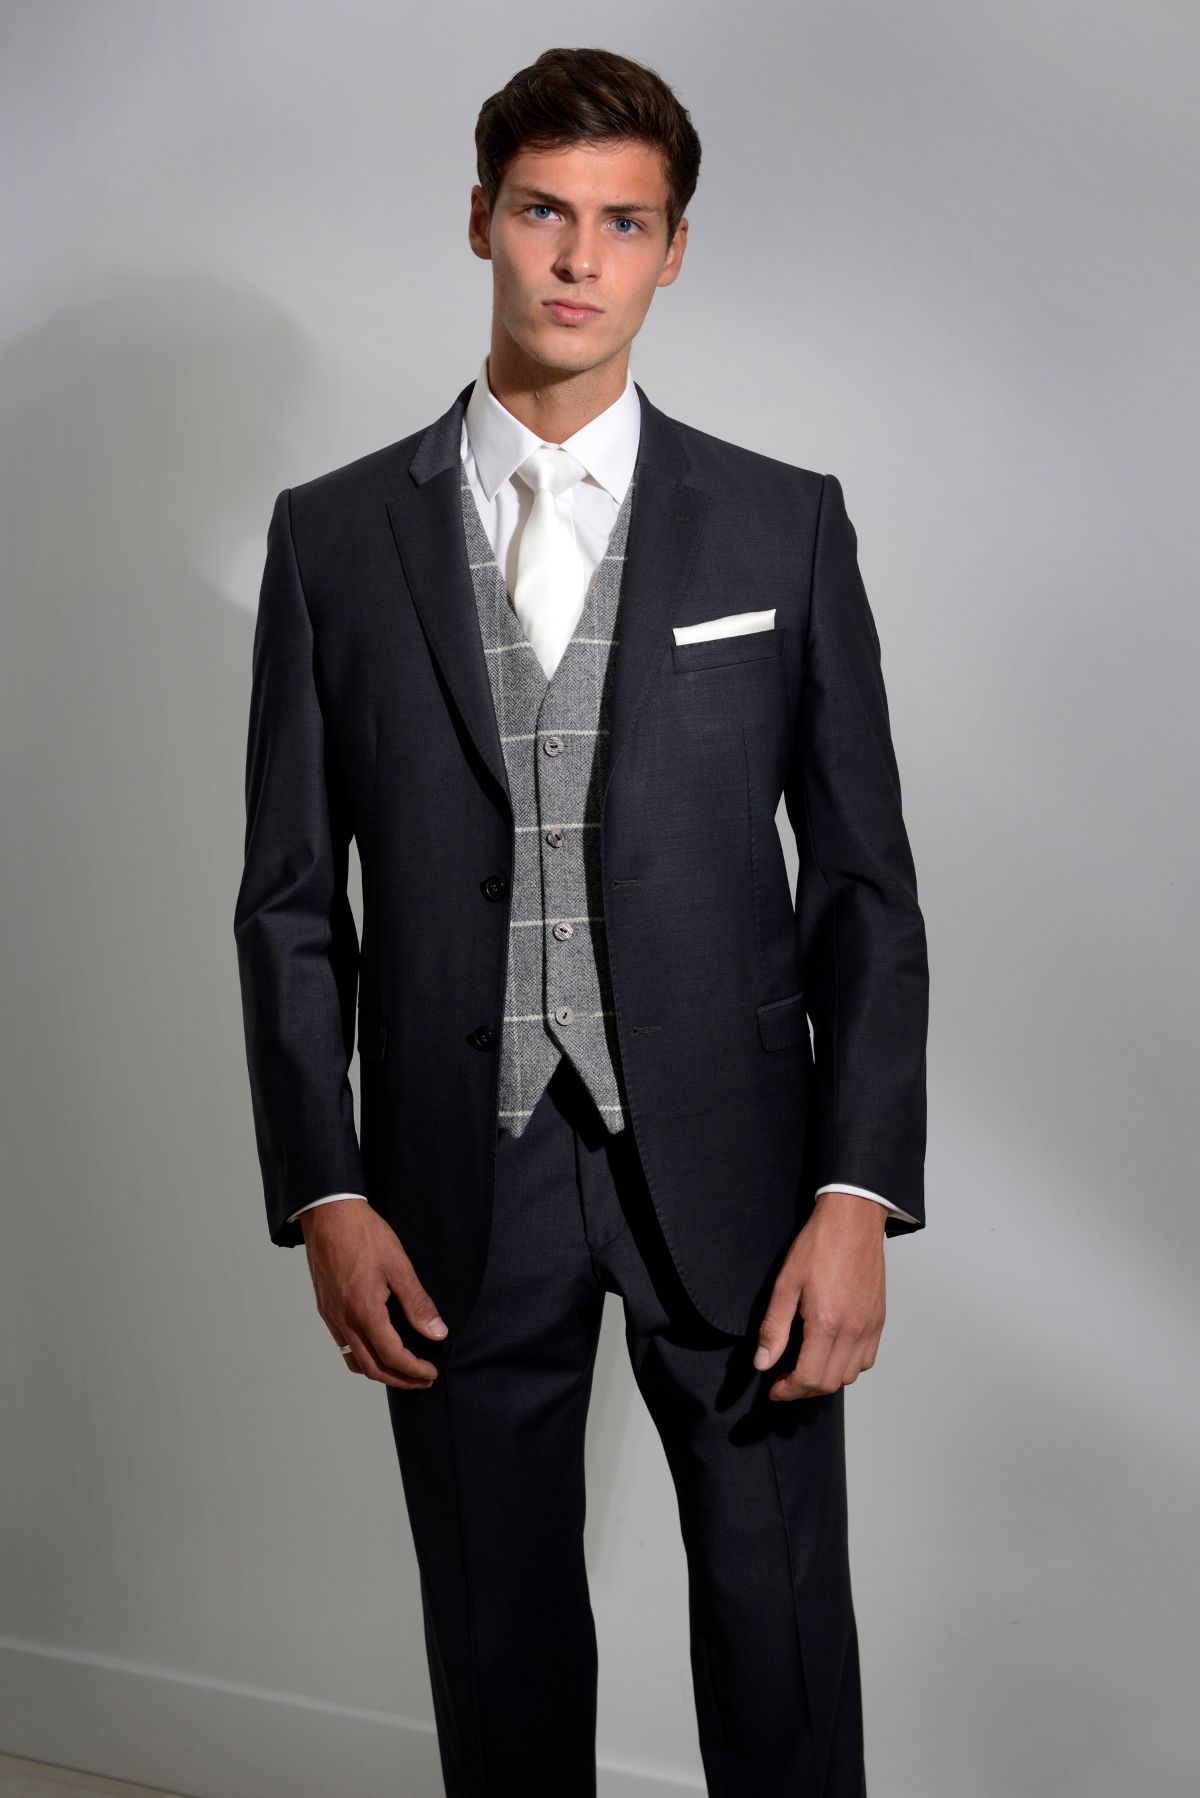 Attire Tailoring | Mens Suit Wear / Hire in Newcastle upon Tyne